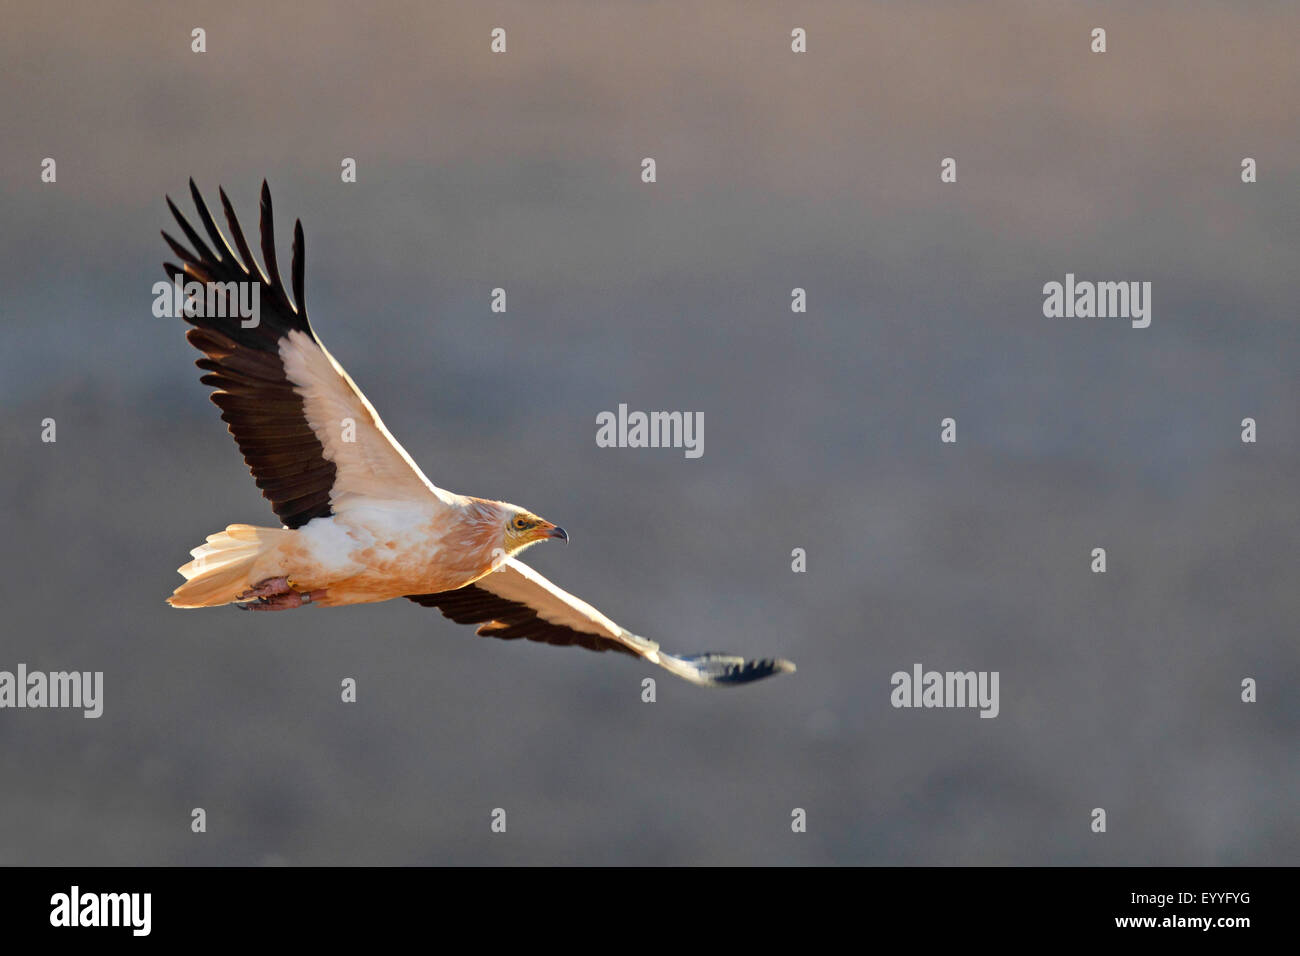 Egyptian vulture (Neophron percnopterus), flying, Canary Islands, Fuerteventura Stock Photo